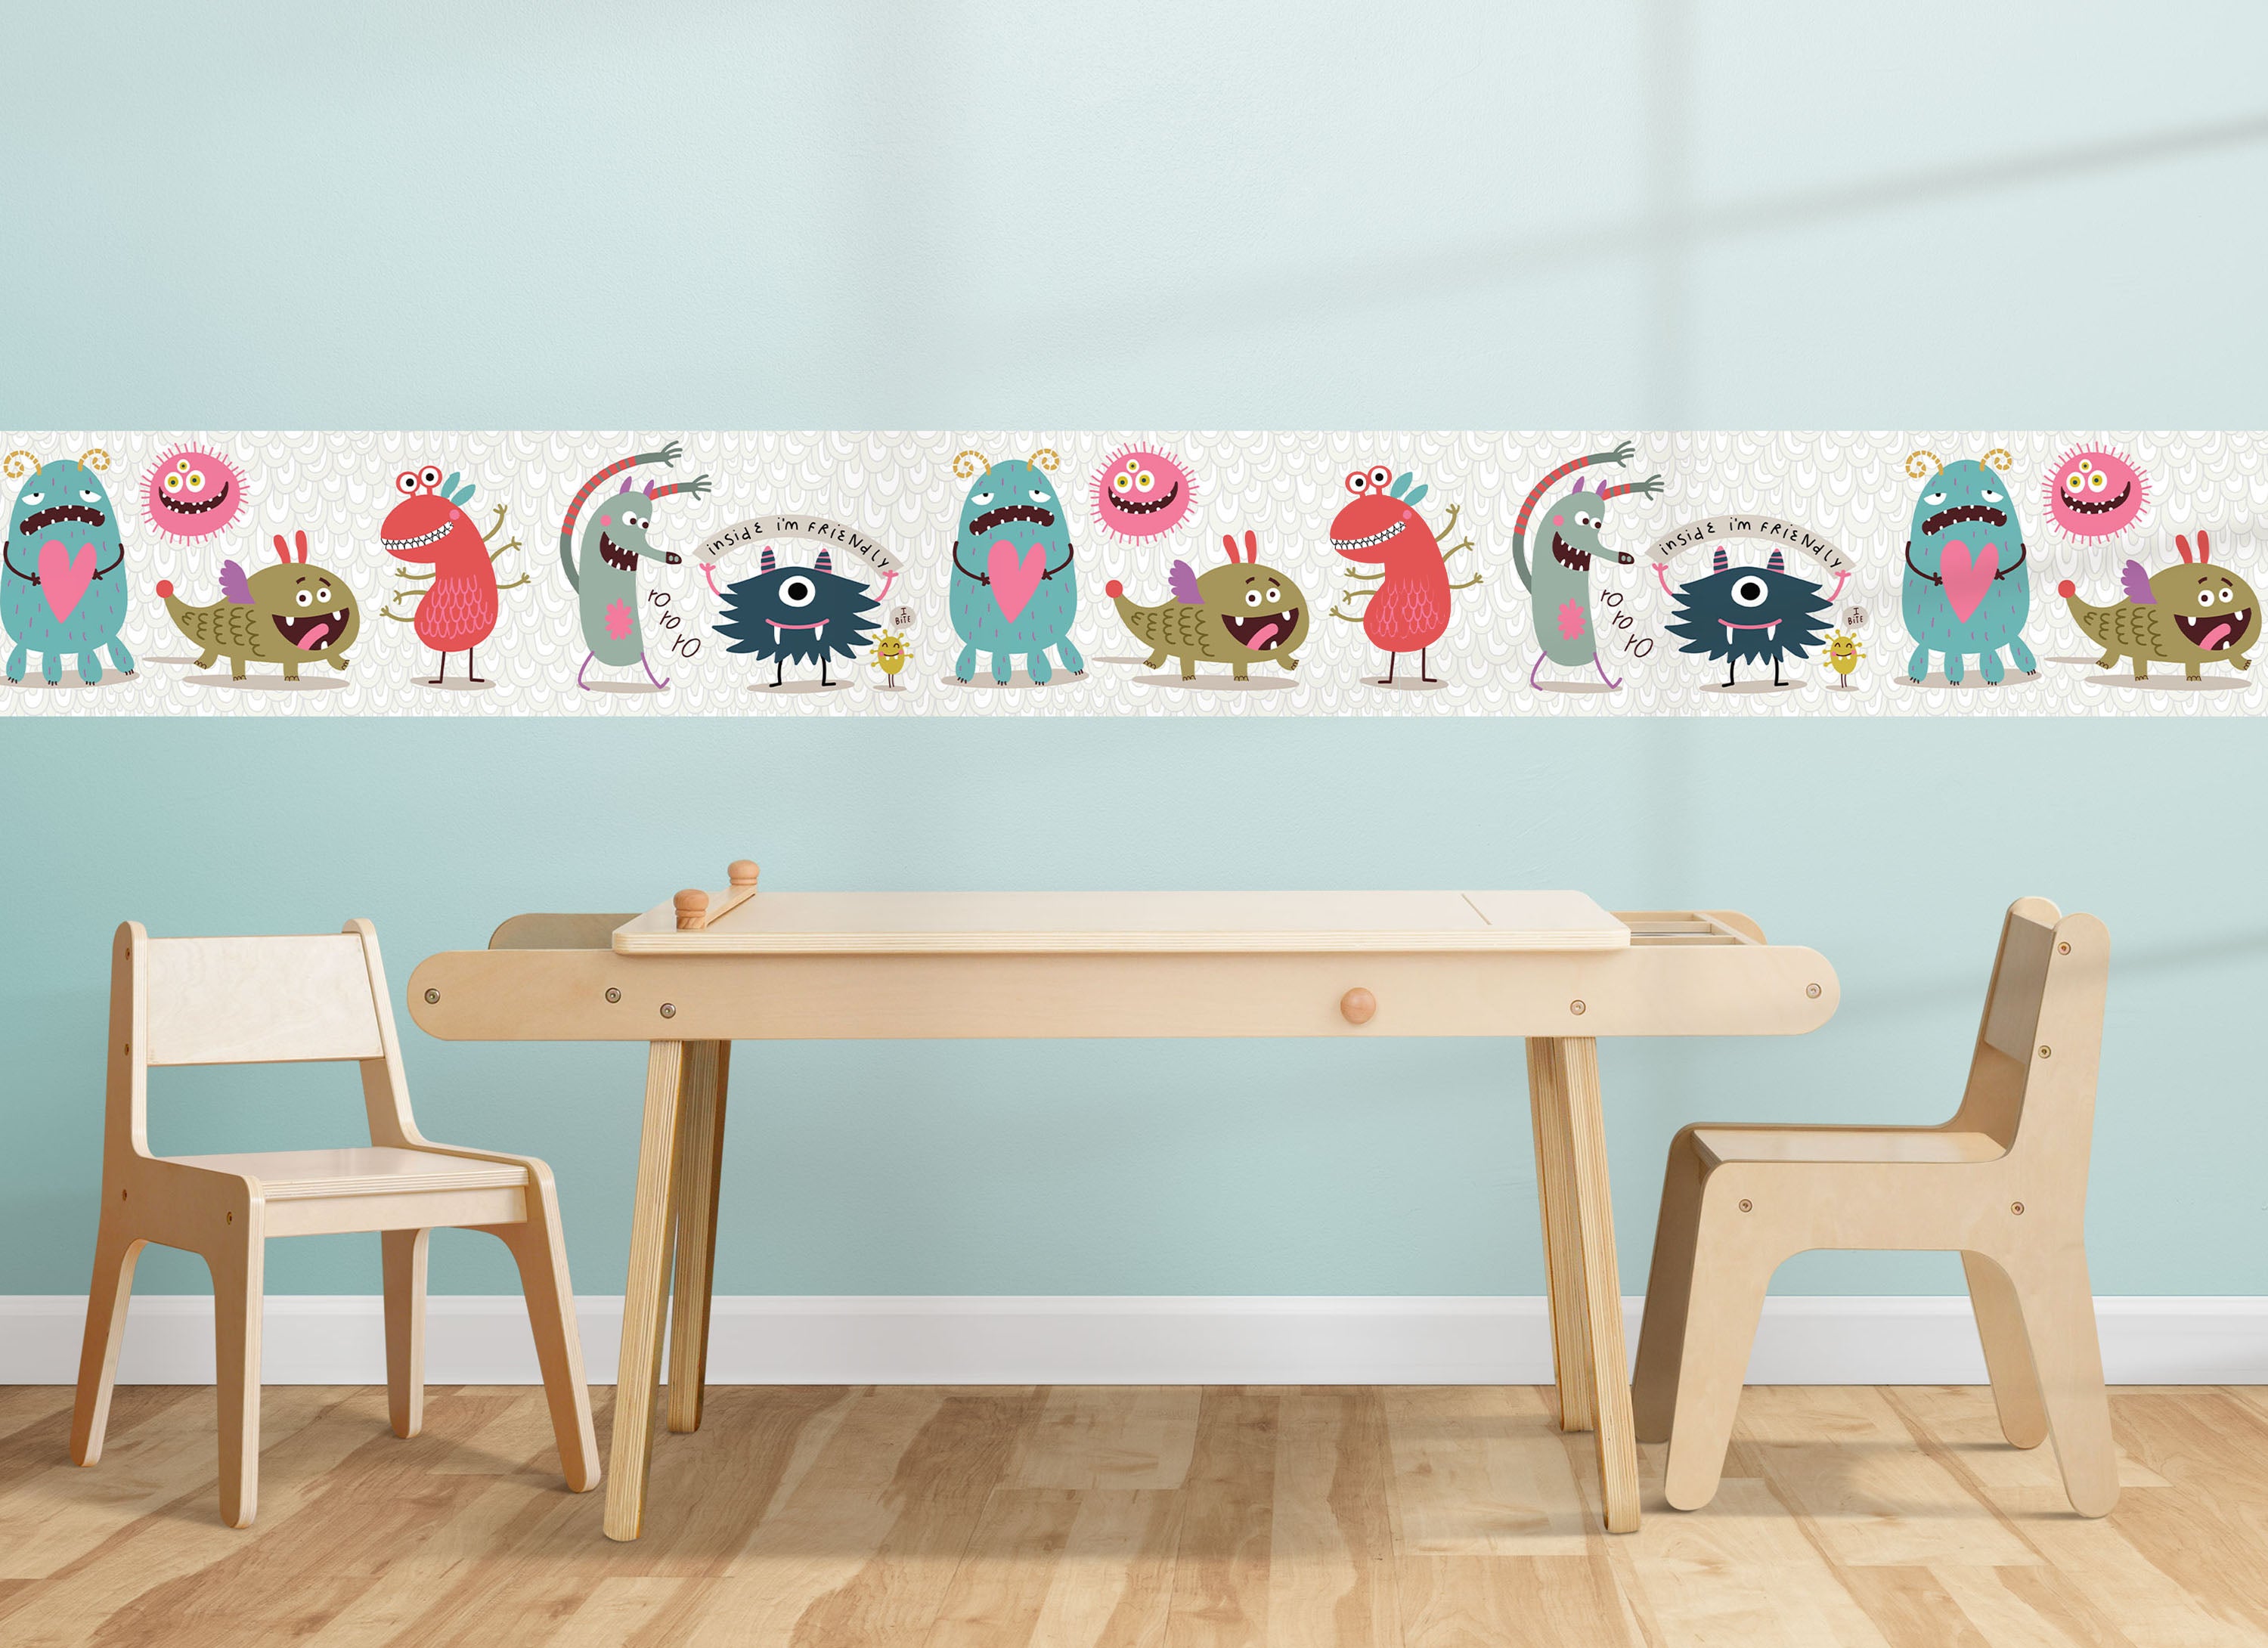 GB90131 Grace & Gardenia Cuddly Monsters Peel and Stick Wallpaper Border 10in Height x 18ft Long, White Gray Blue Pink